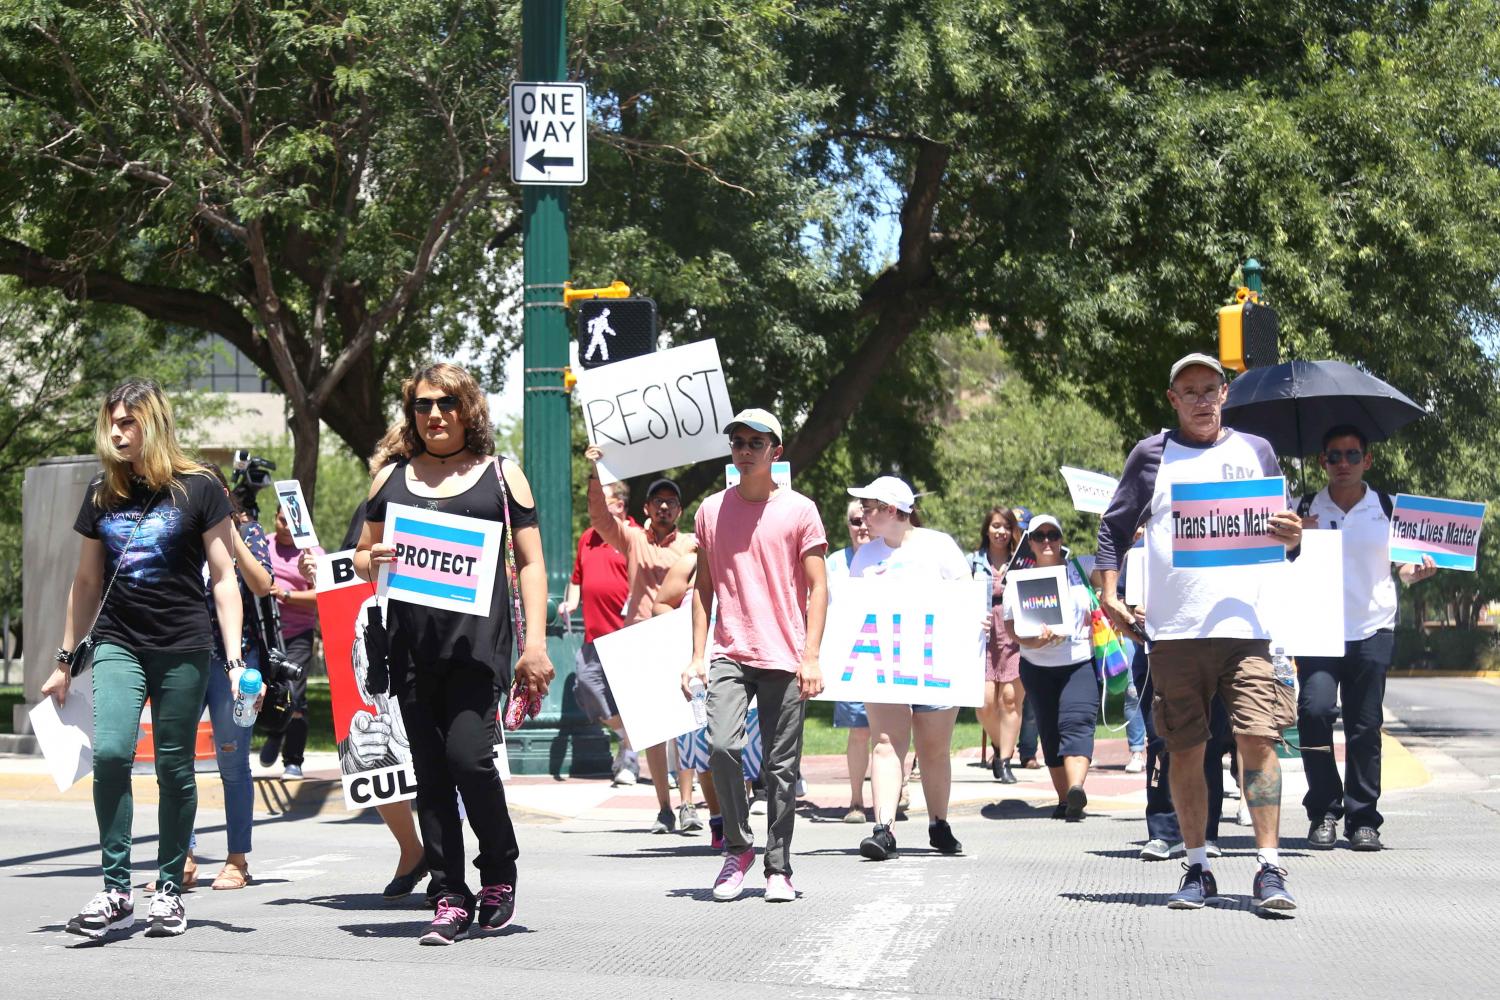 A march from the federal courthouse to San Jacinto Plaza was held on Saturday, July 29.